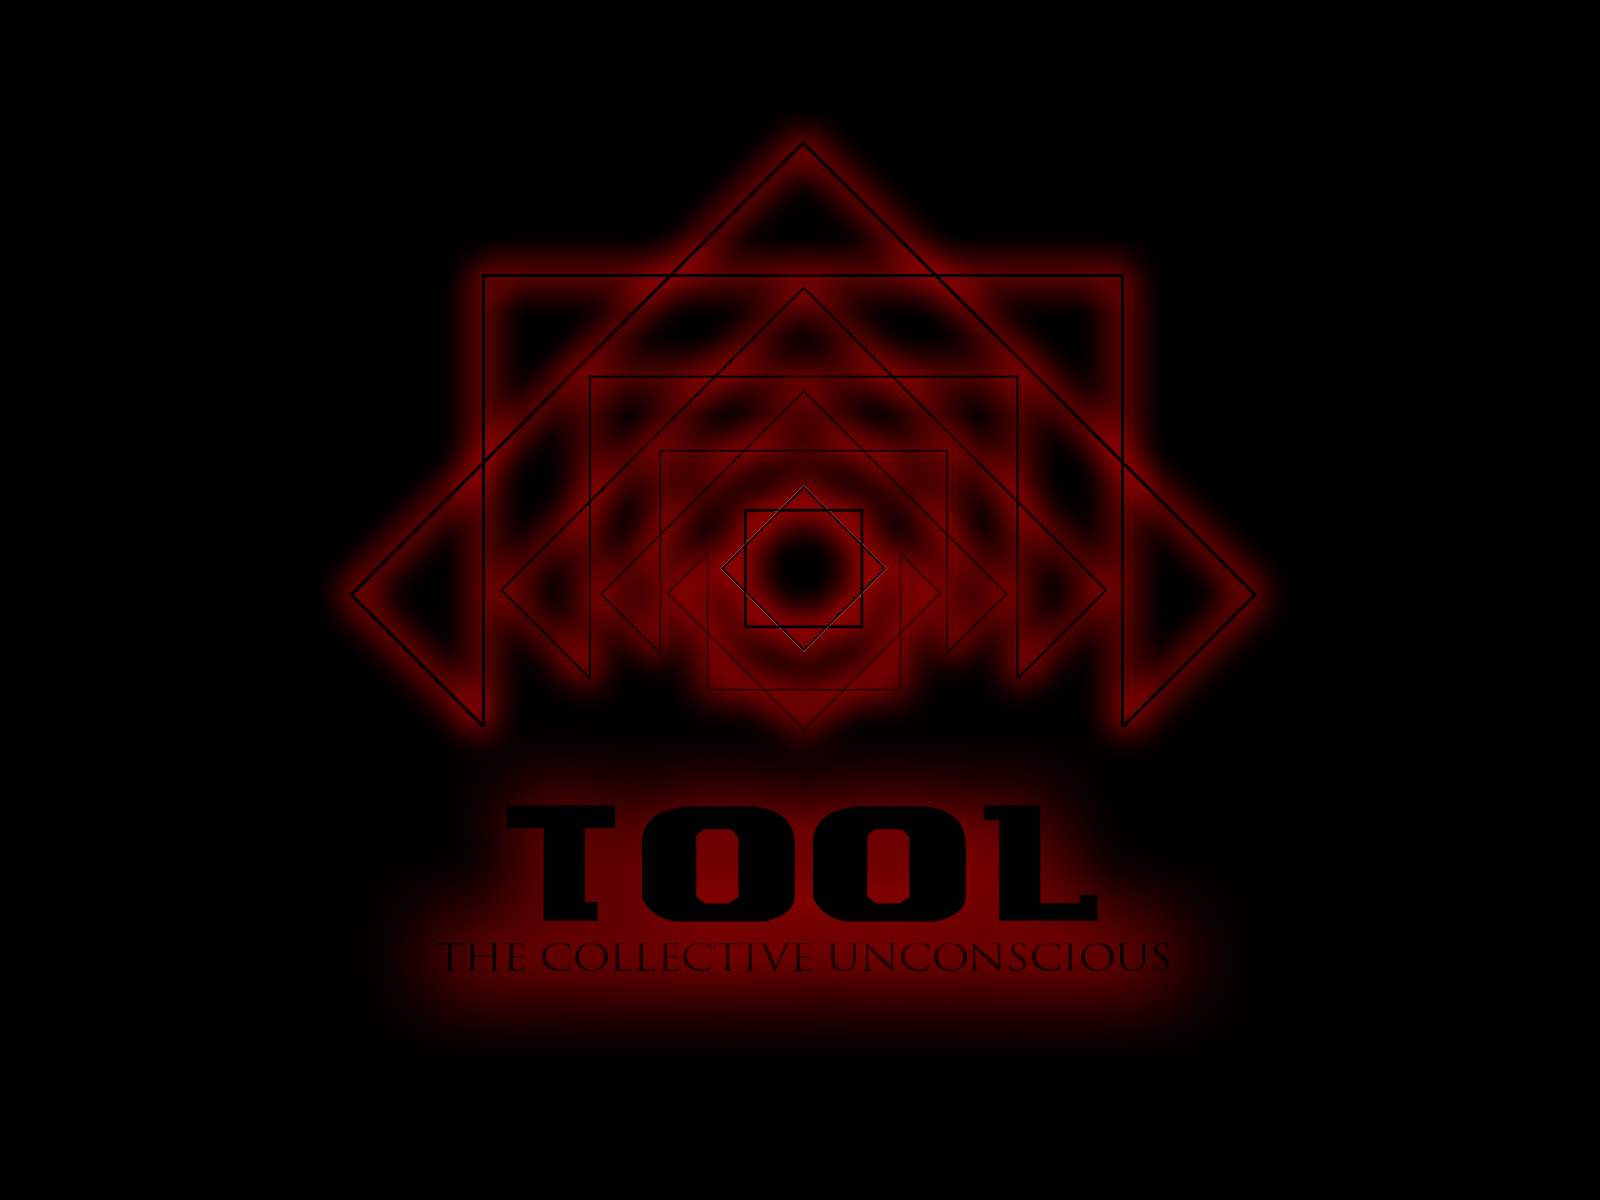 Tool - another by tool-band on DeviantArt